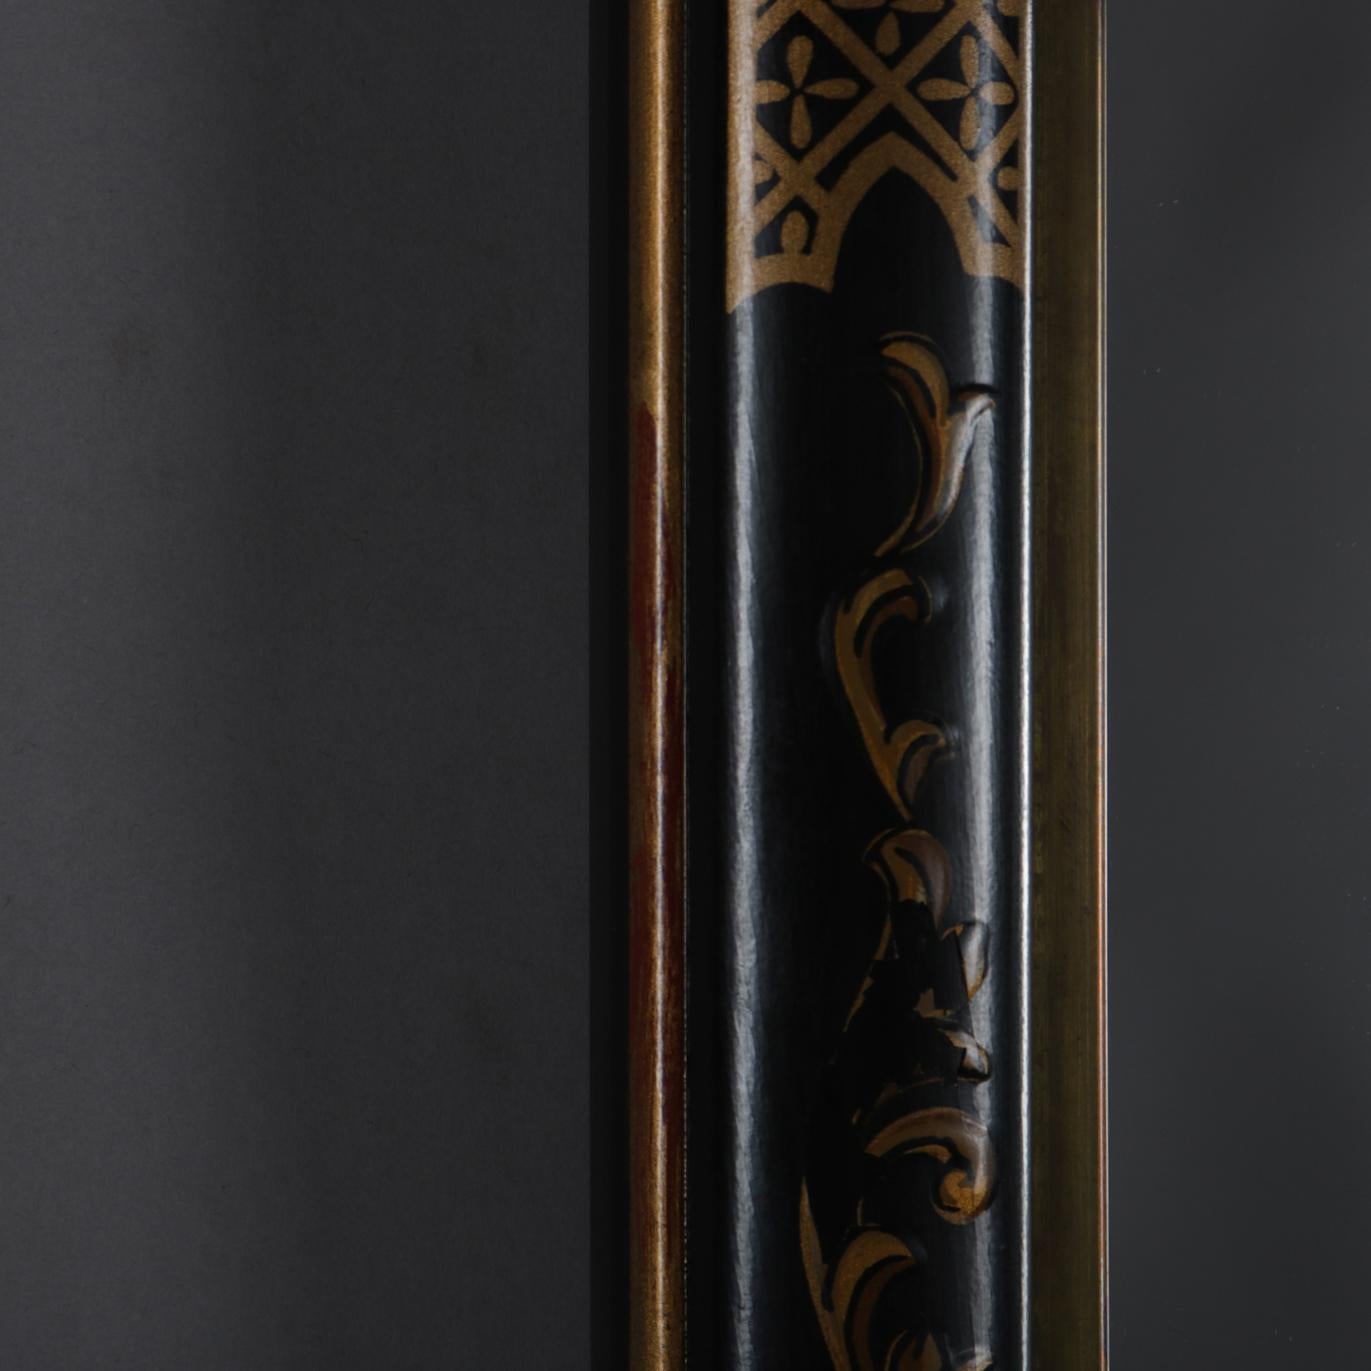 European Chinoiserie Ebonized and Gilt Decorated Parclose Wall Mirror, 20th Century